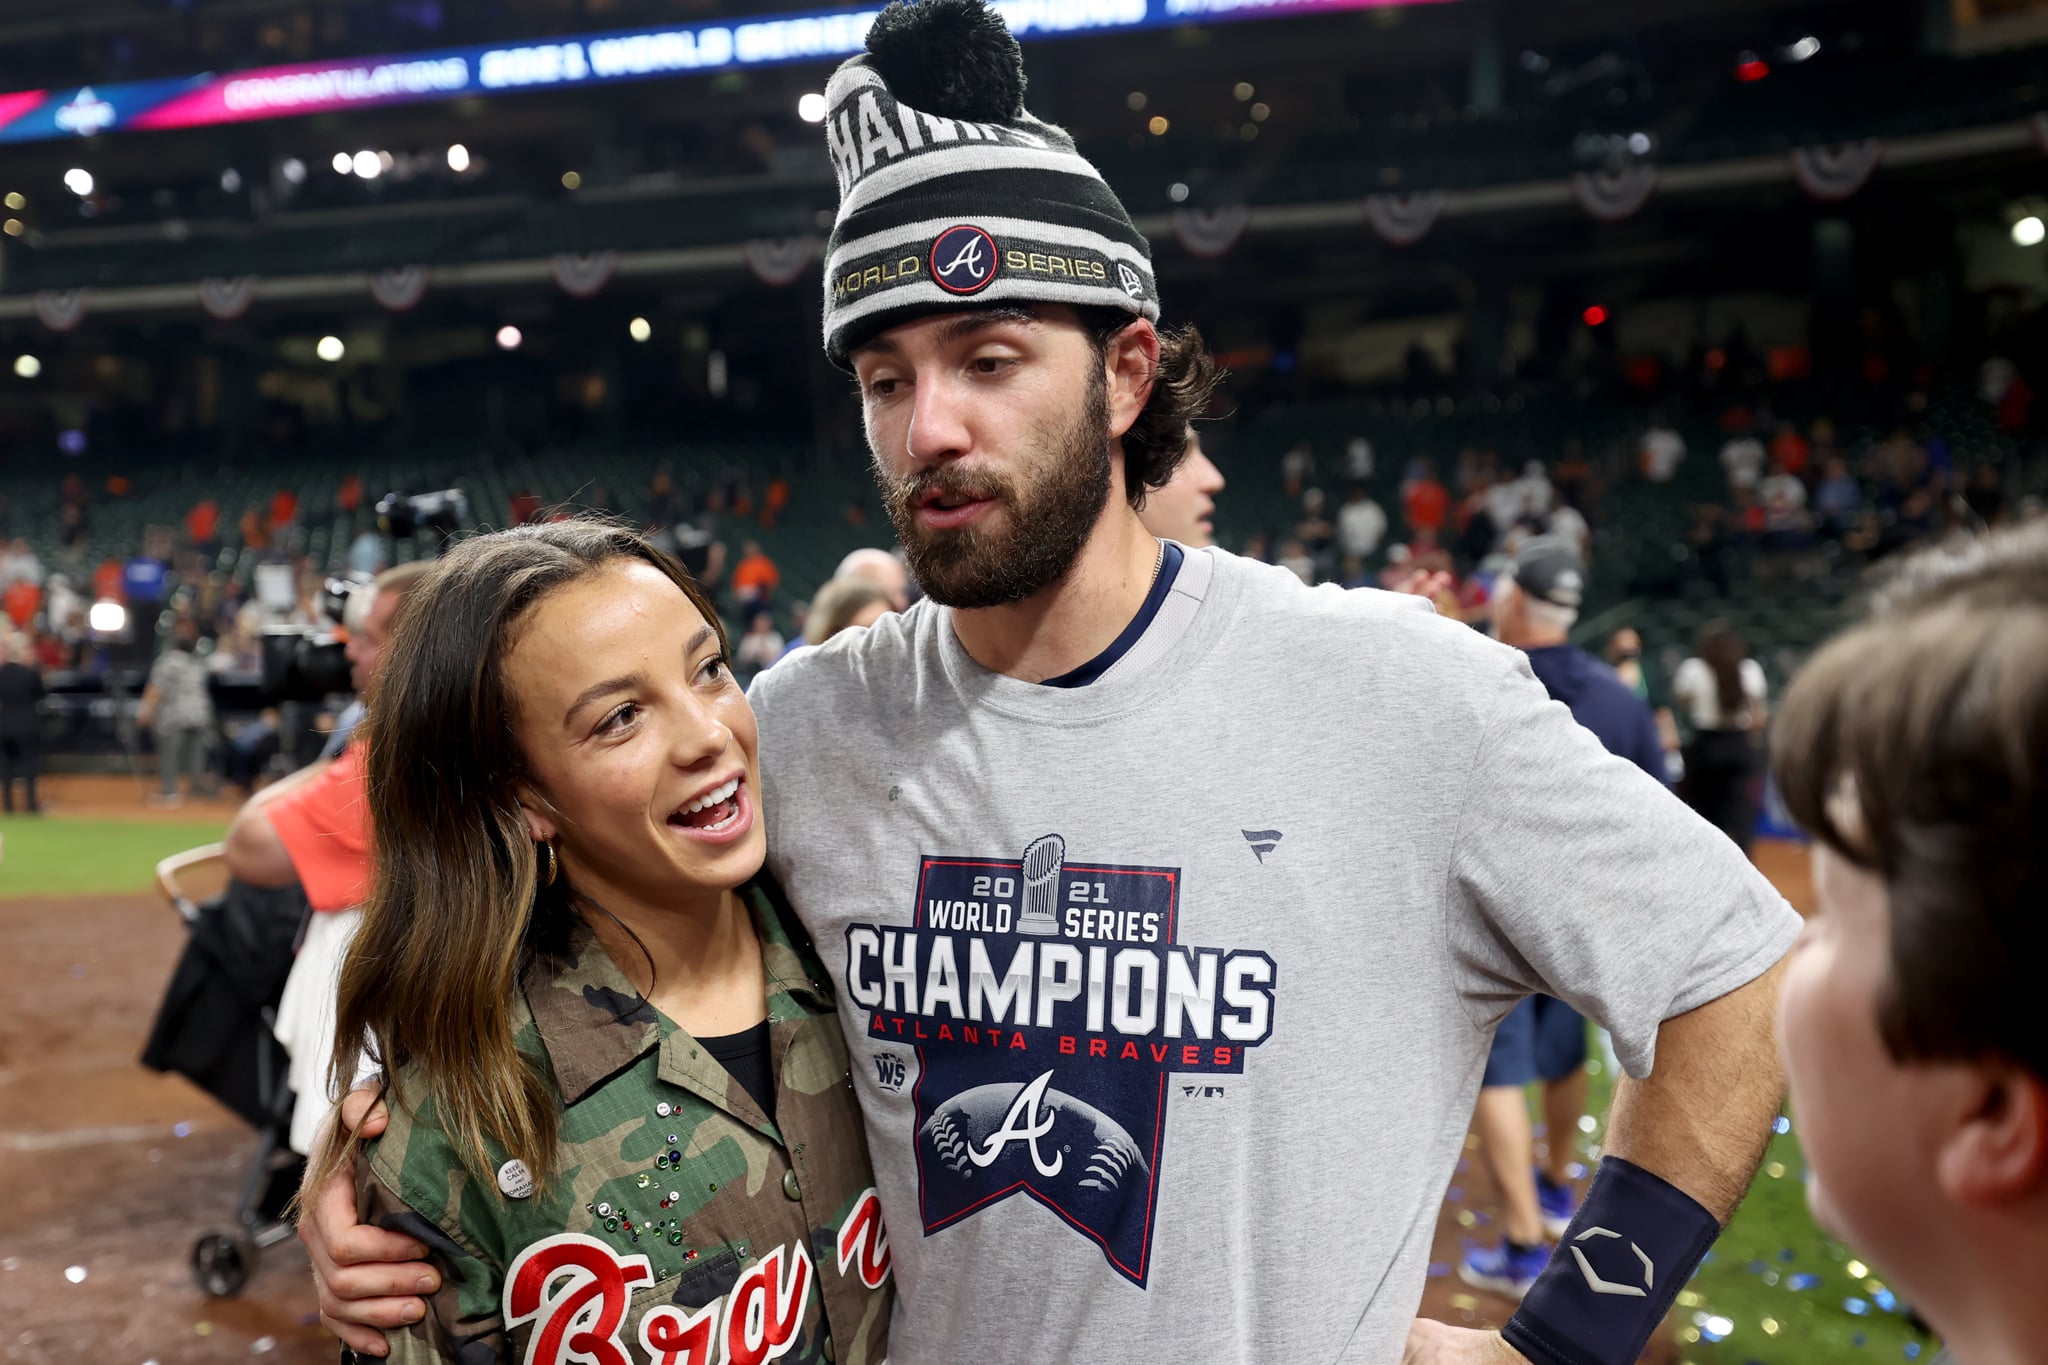 Mallory Pugh and Dansby Swanson Are Engaged